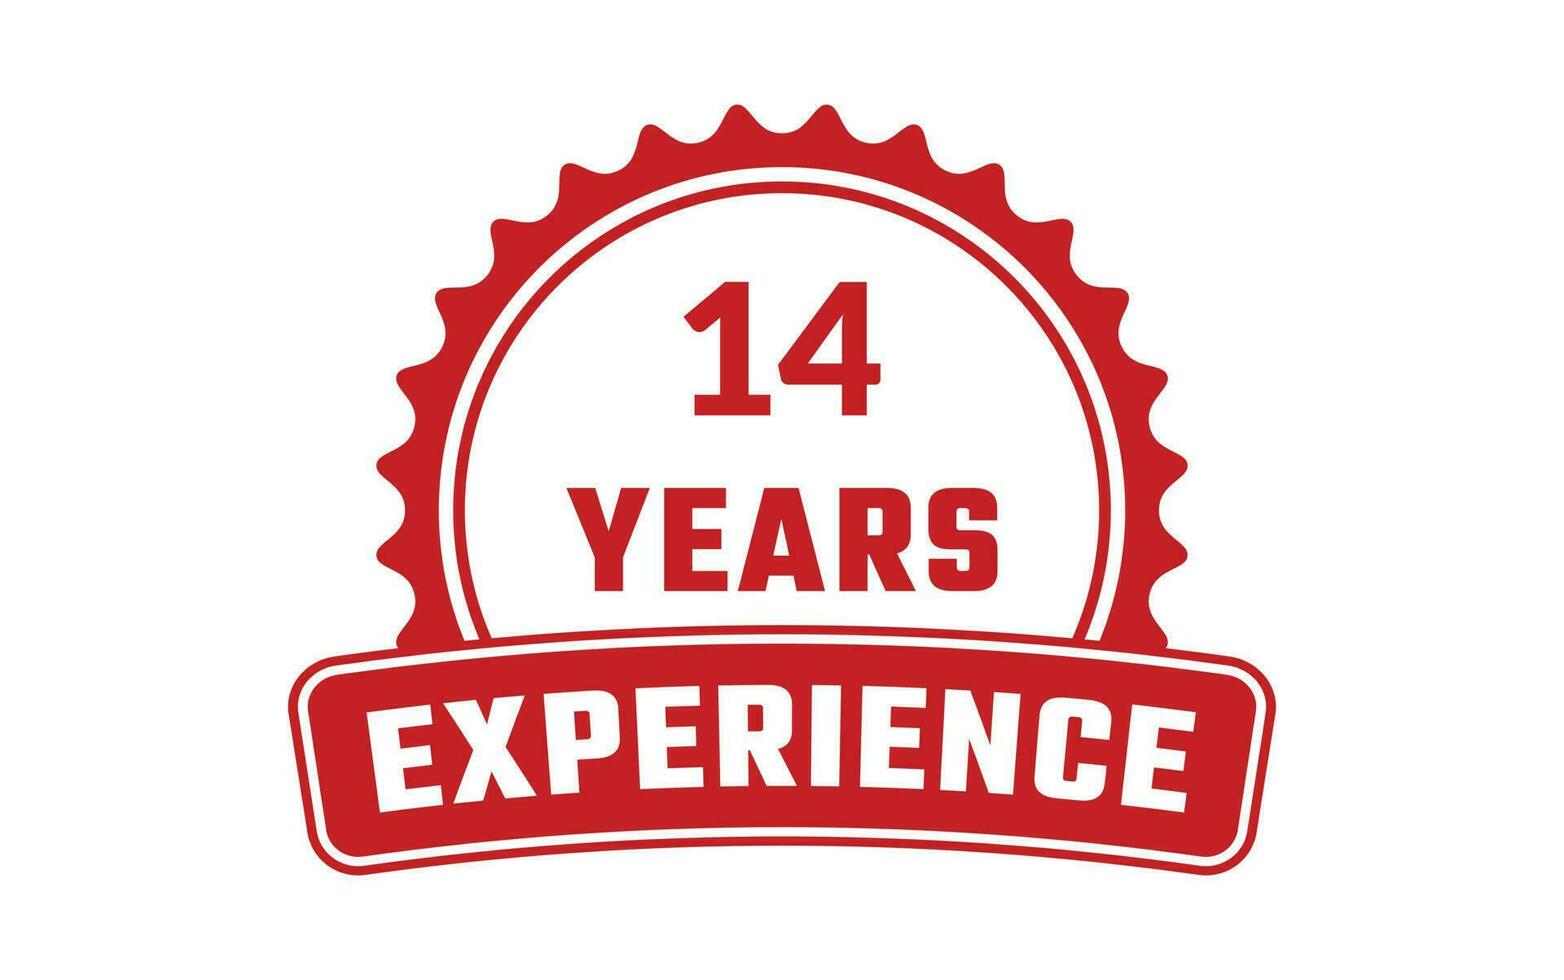 14 Years Experience Rubber Stamp vector